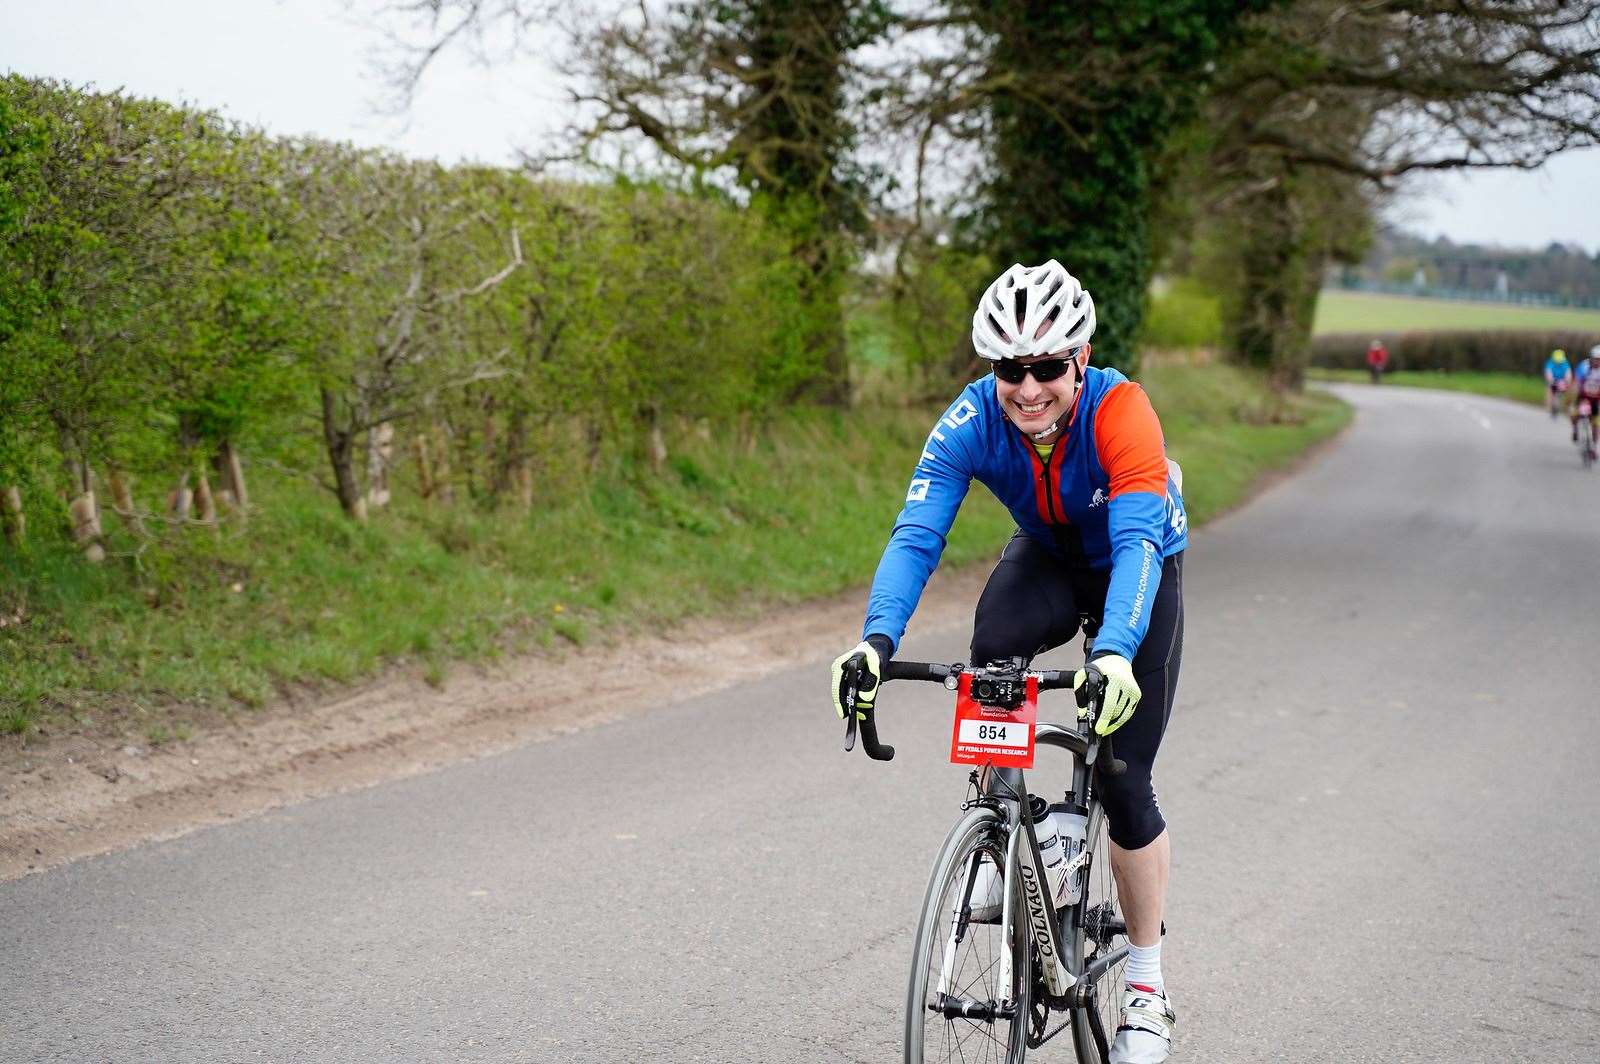 Mark Wilson is one of the Magnificent Seven attempting a record-breaking ride from John O'Groats to Land's End for the charity Cyclists Fighting Cancer.